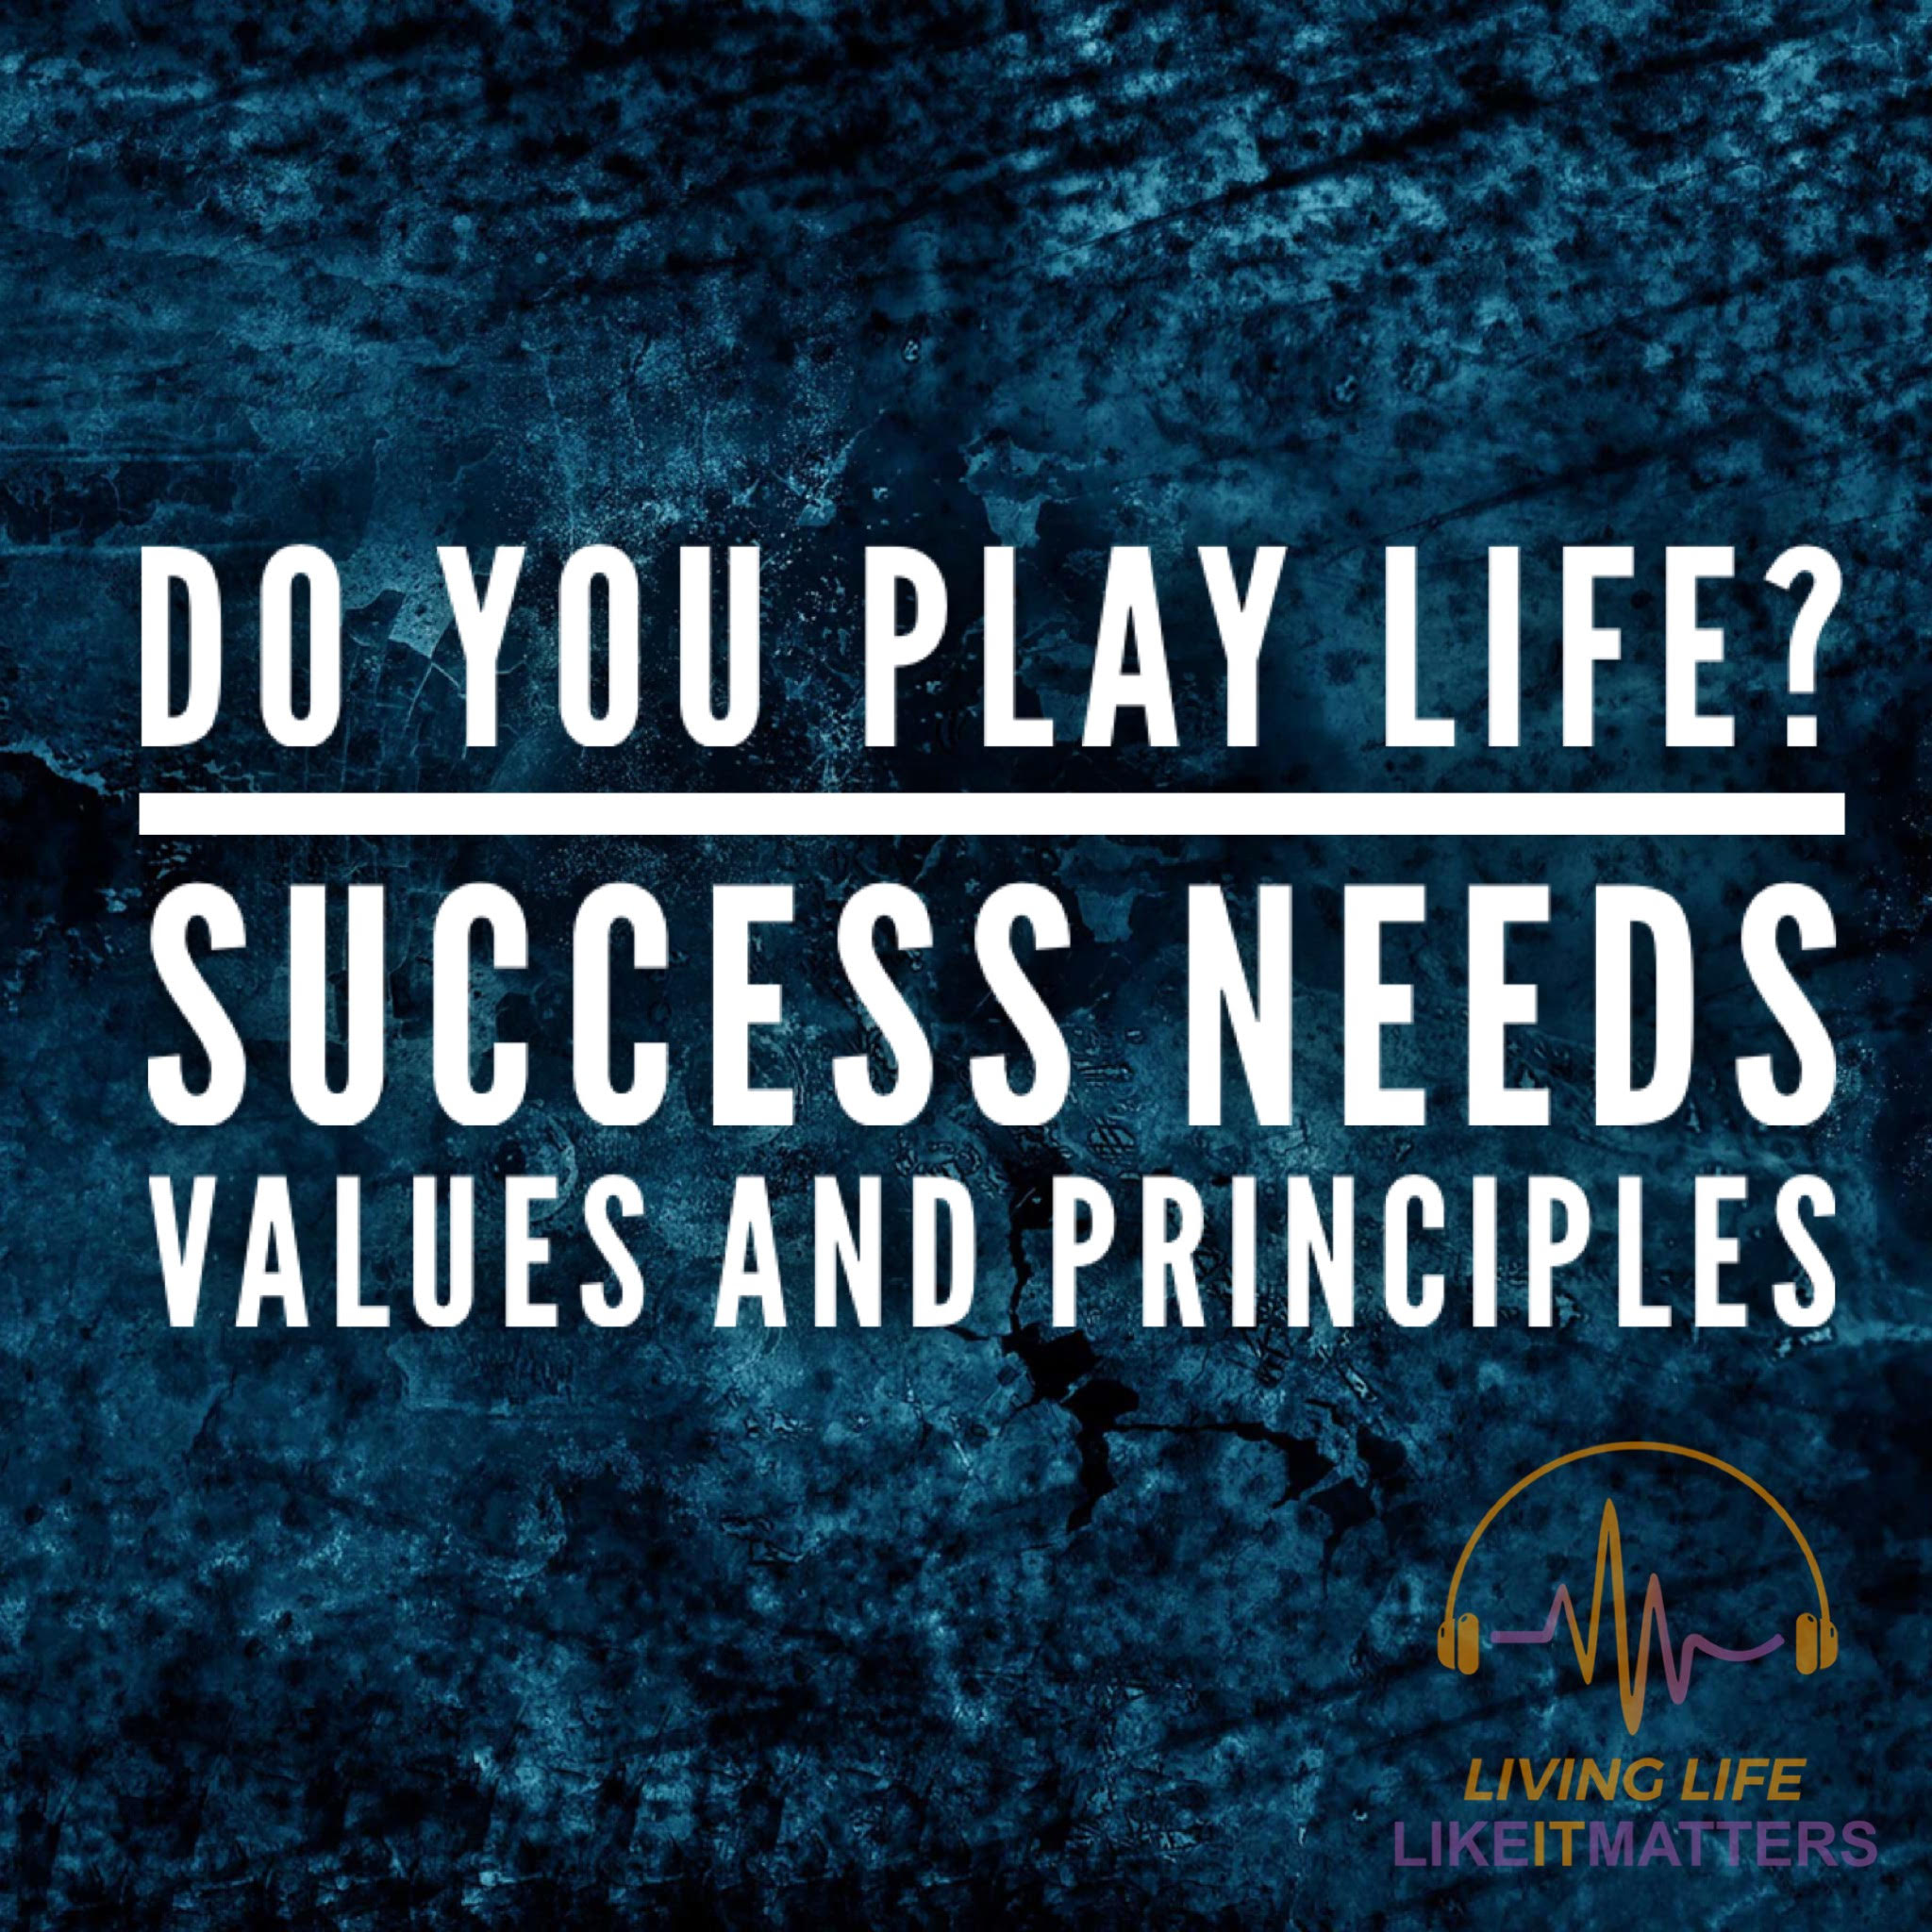 Do You Play Life? Success Needs Values and Principles